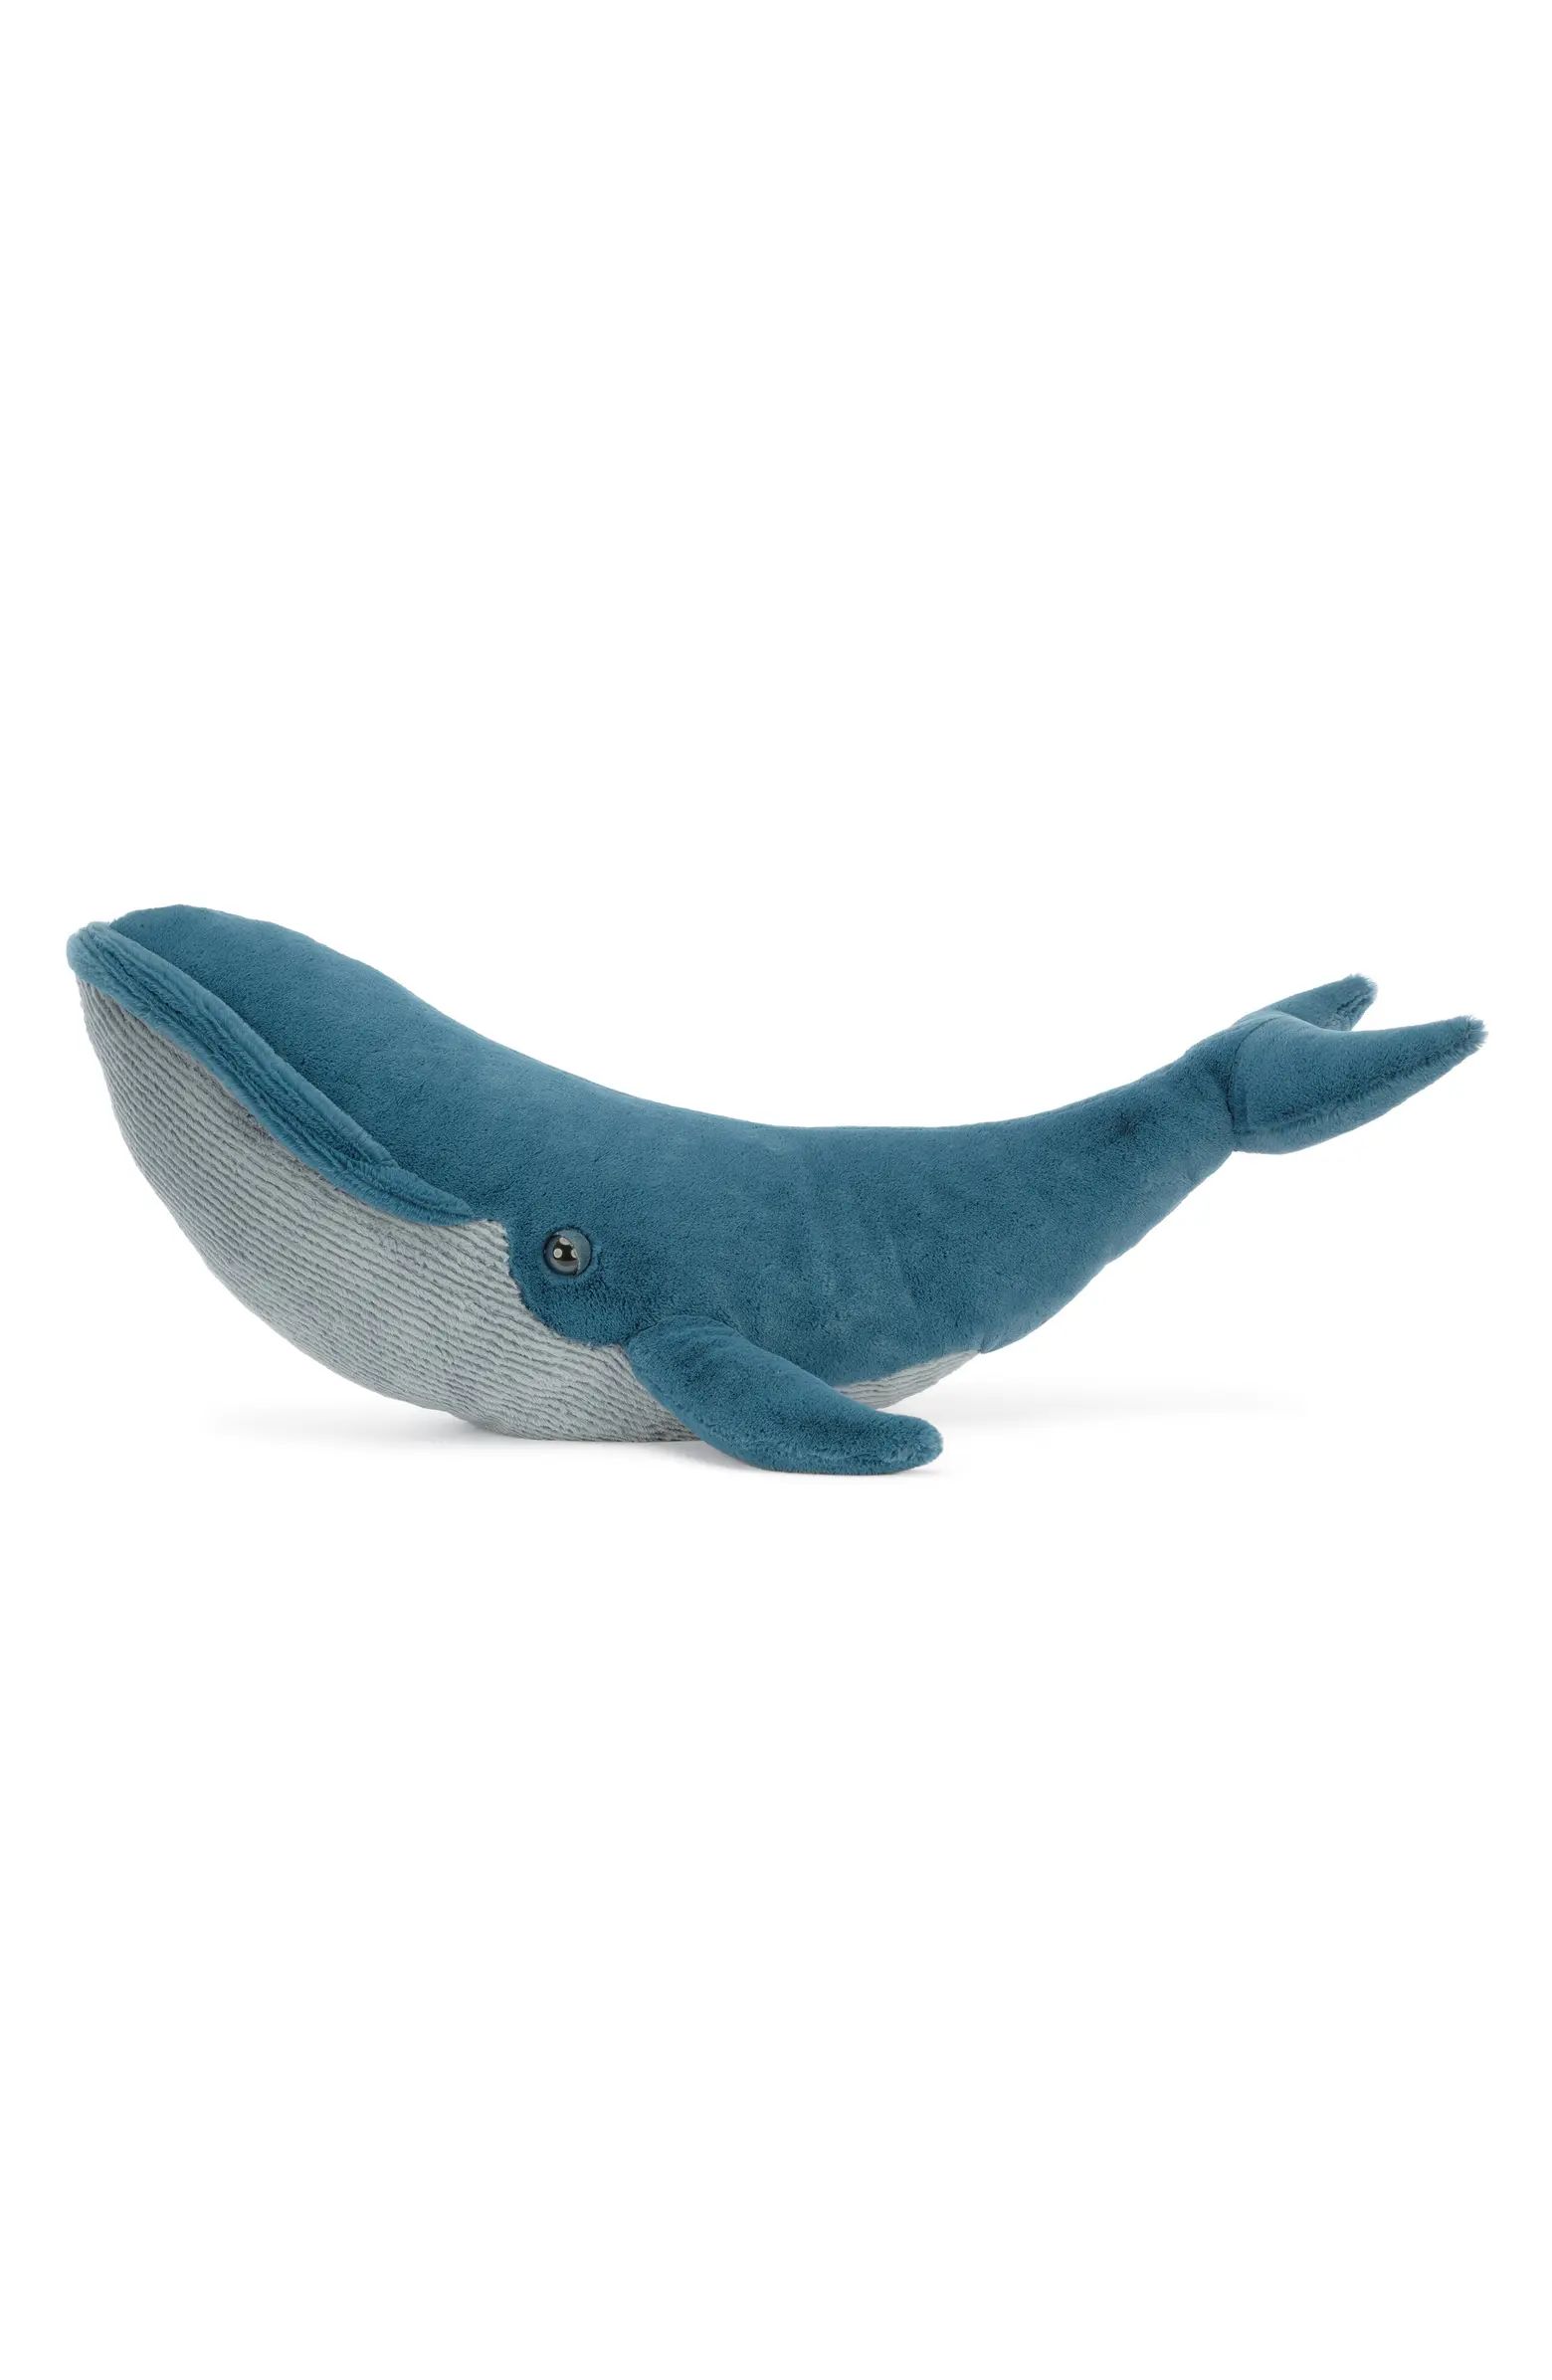 Jellycat Gilbert the Great Blue Whale Stuffed Animal | Nordstrom | Nordstrom